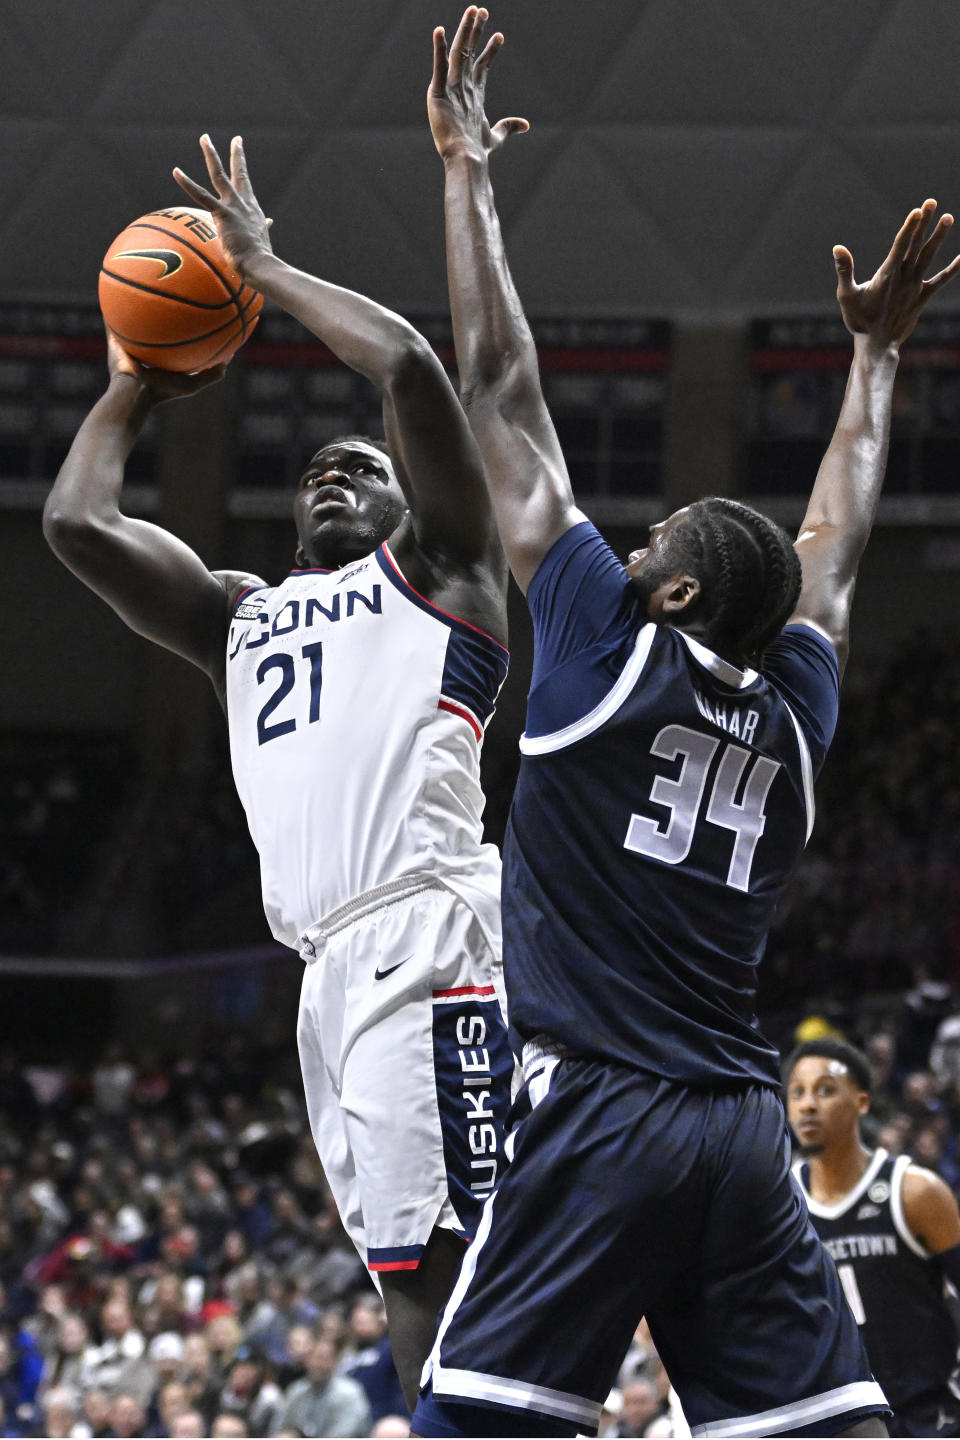 Connecticut's Adama Sanogo (21) shoots over Georgetown's Qudus Wahab (34) in the first half of an NCAA college basketball game, Tuesday, Dec. 20, 2022, in Storrs, Conn. (AP Photo/Jessica Hill)